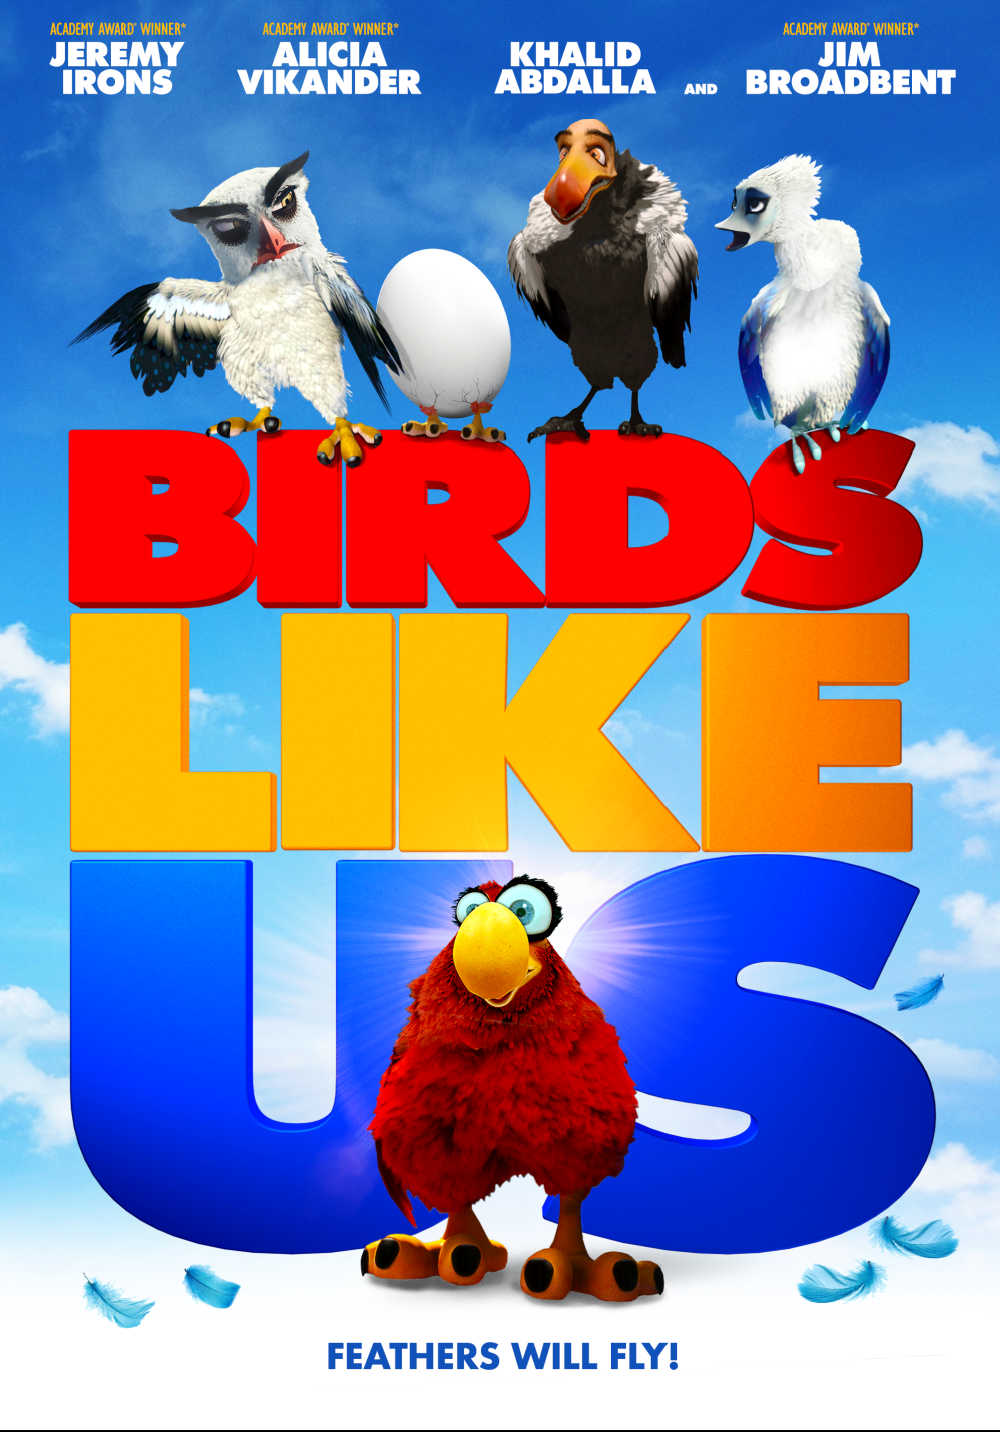 Enjoy the new animated Birds Like Us DVD, so you and your kids can join the adventure of this entertaining family film.